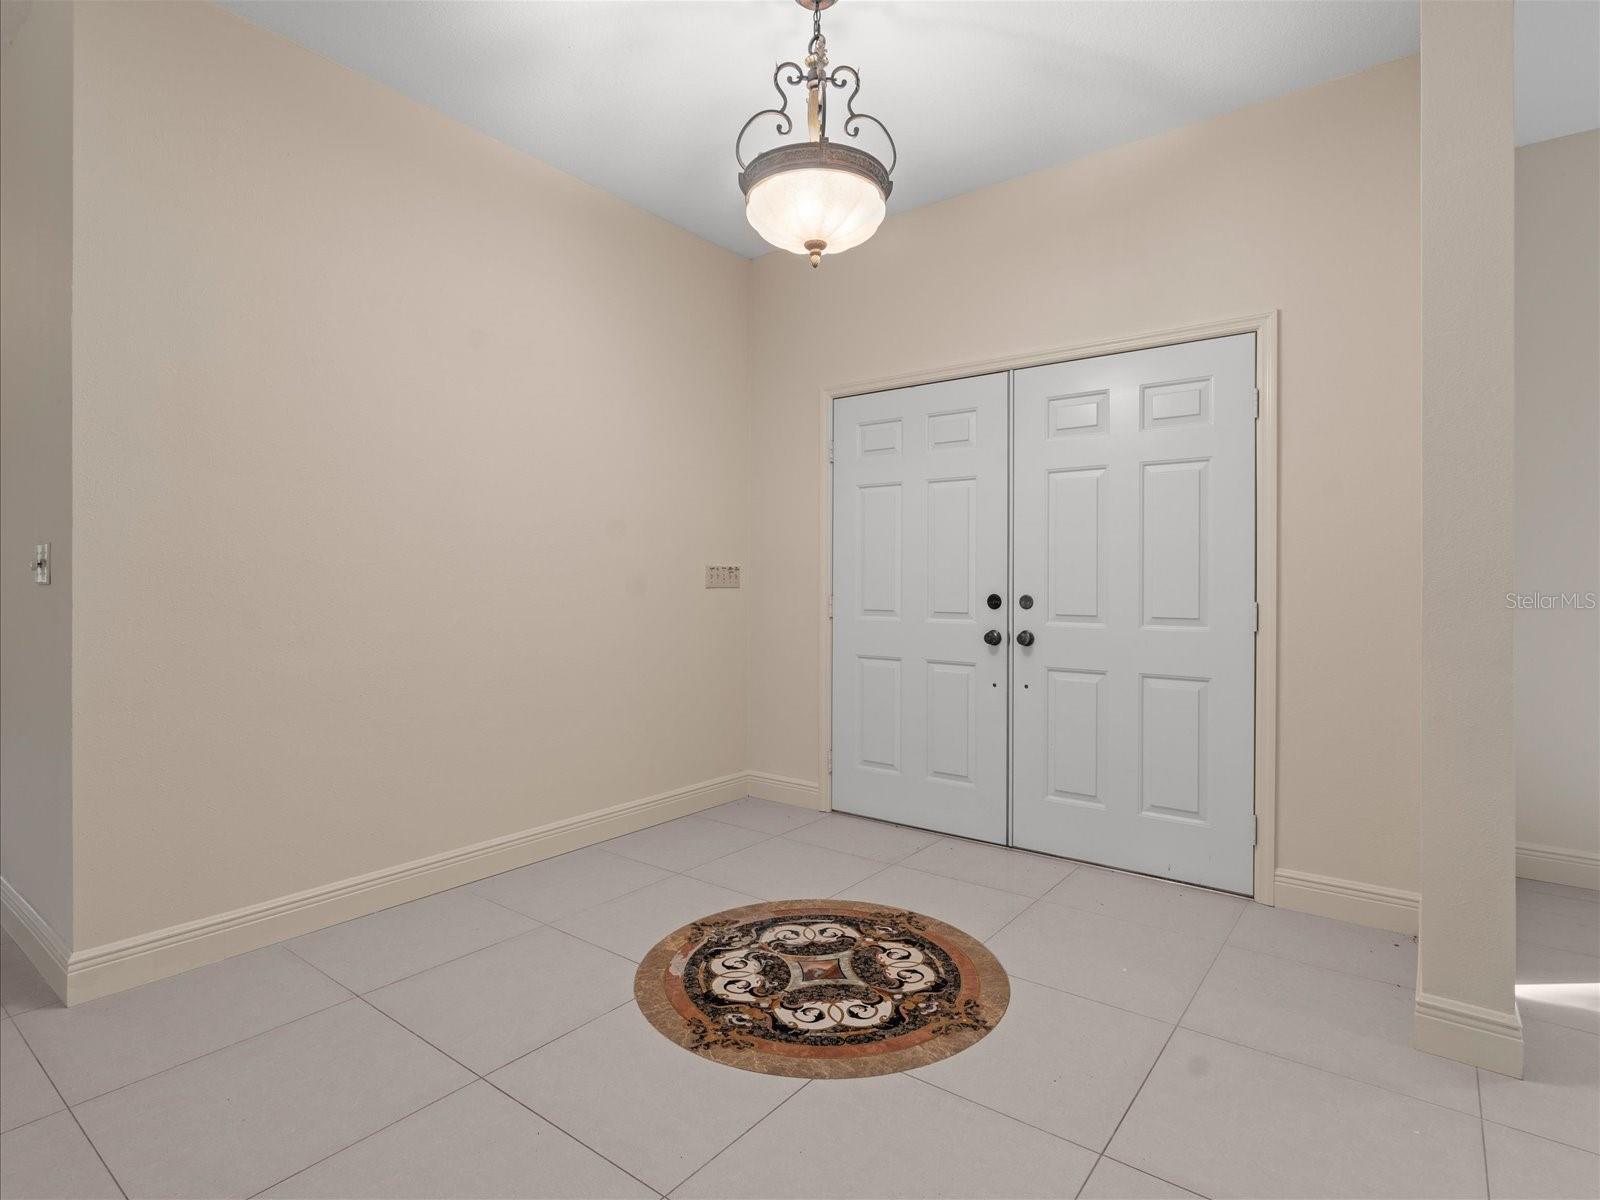 Welcome to your Main House with custom tile medallion entryway